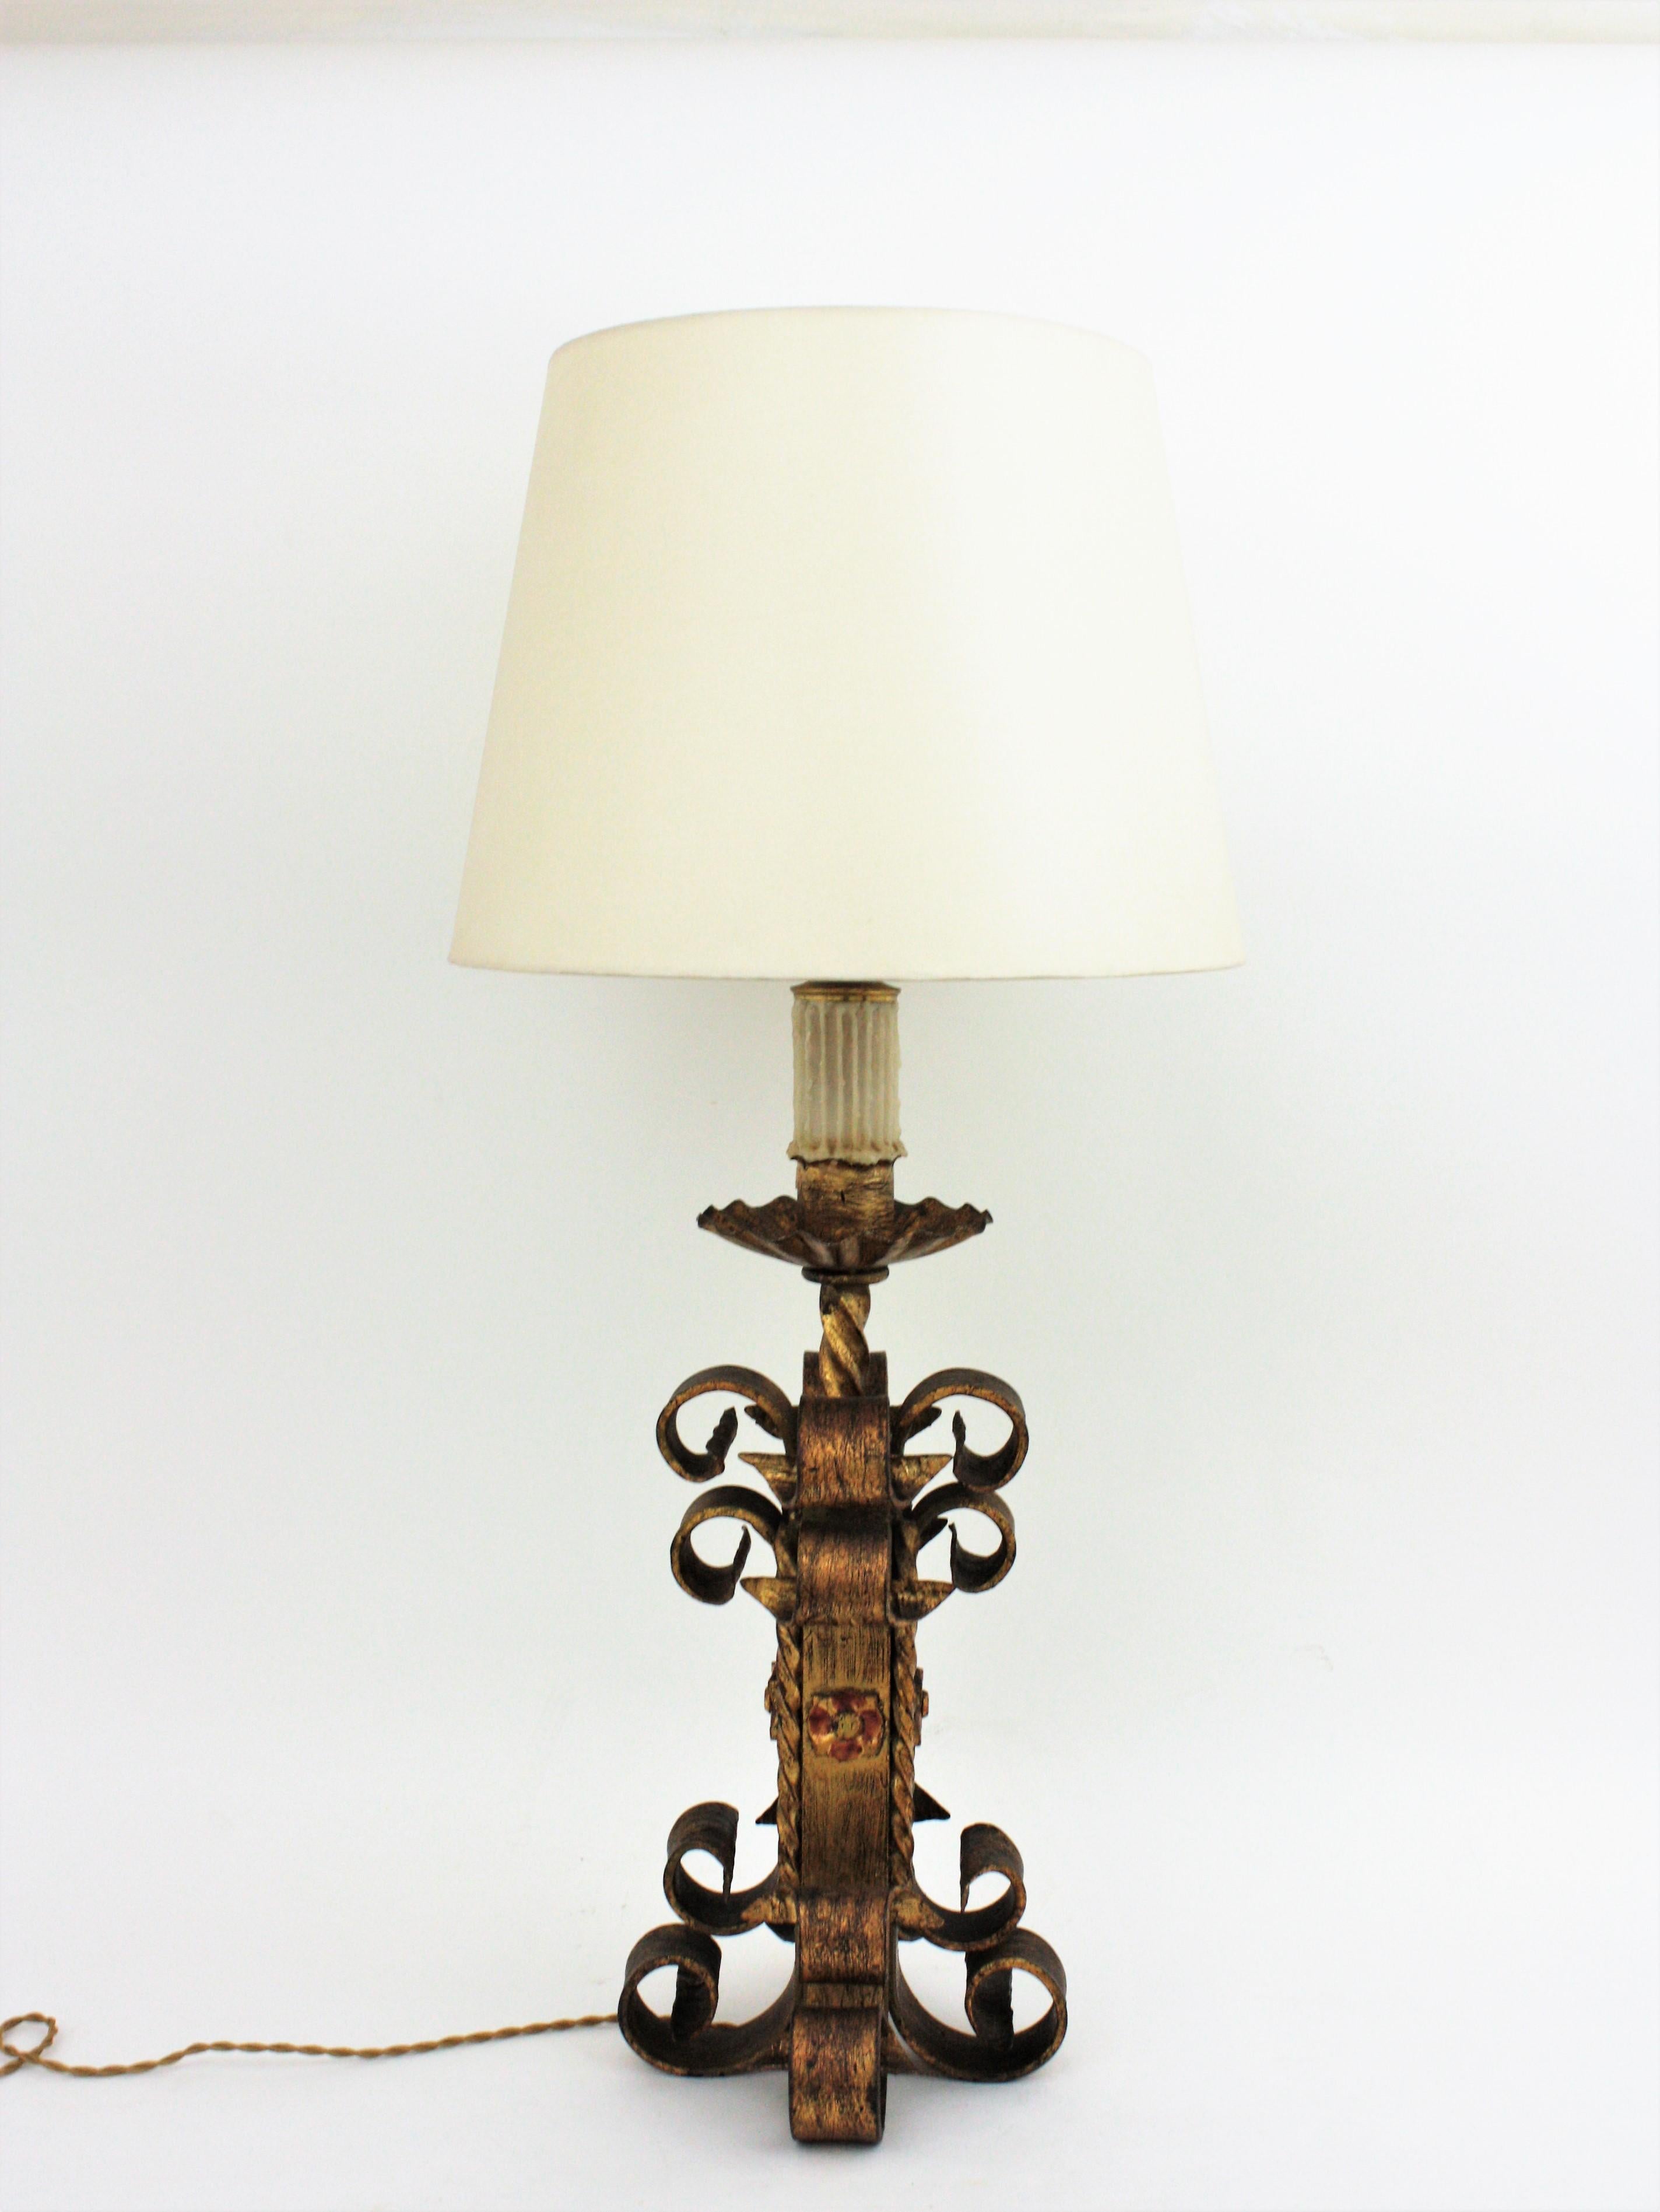 Spanish Revival Scrollwork Table Lamp in Gilt Wrought Iron, 1940s For Sale 9